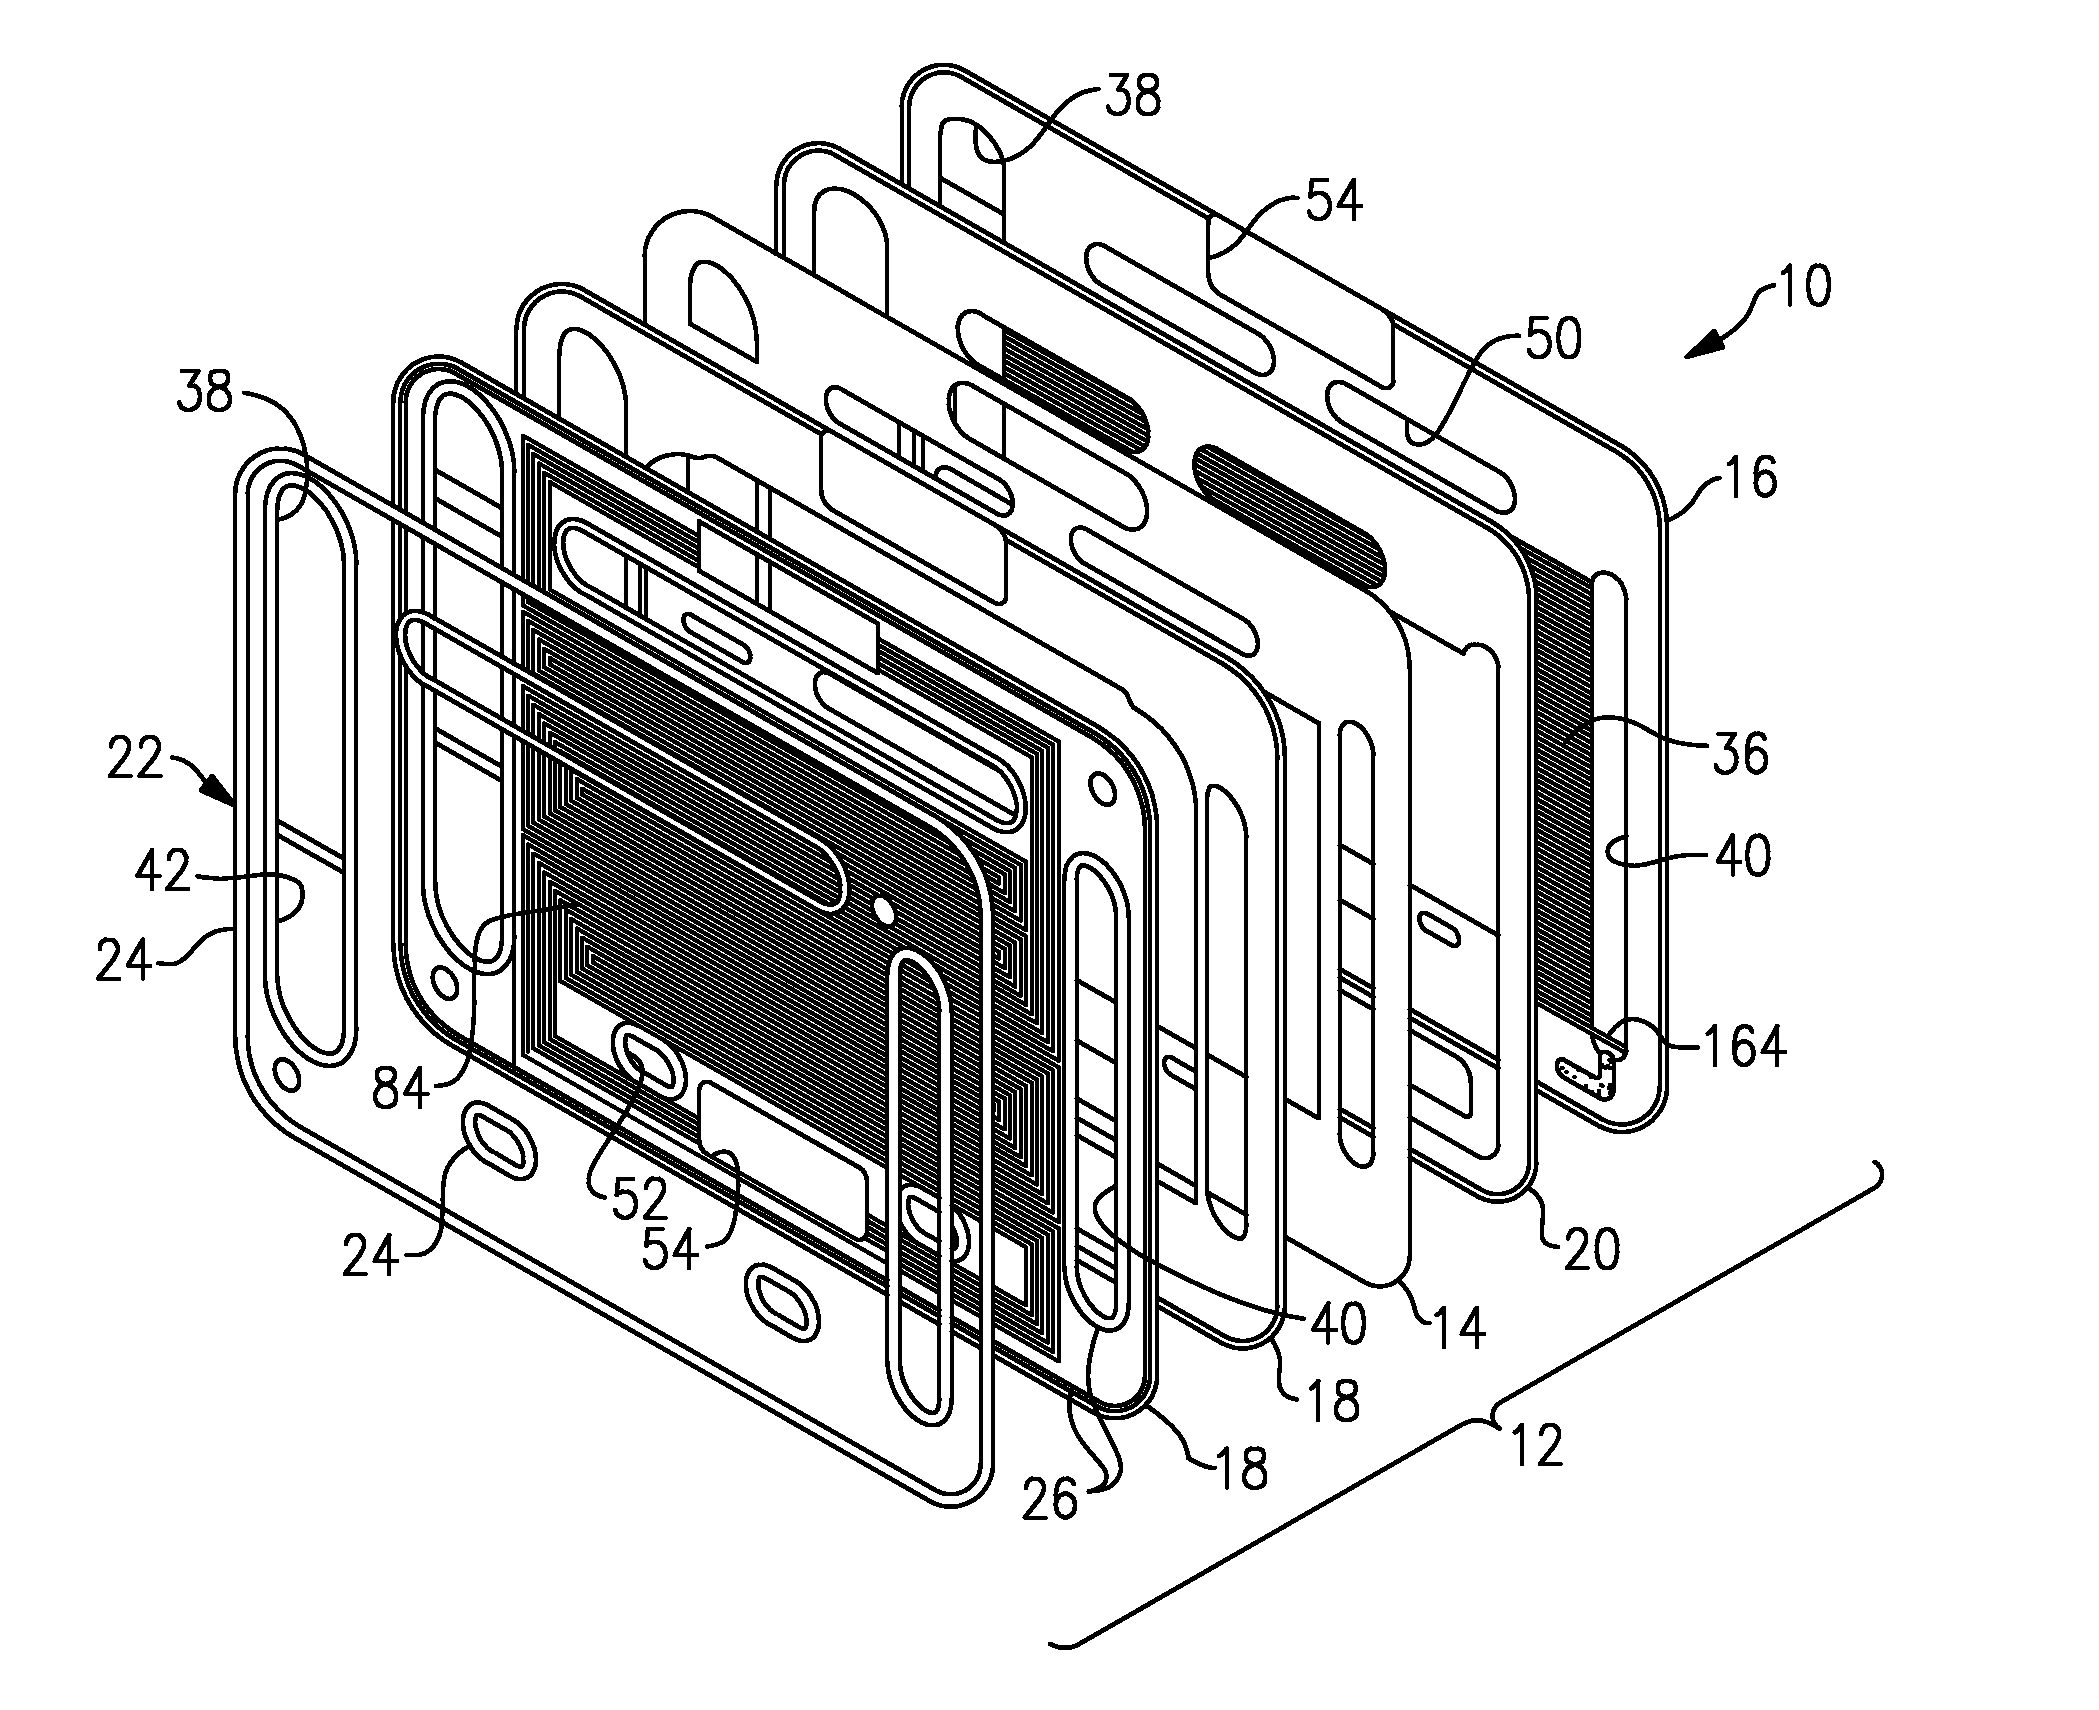 Fuel cell and bipolar plate having manifold sump